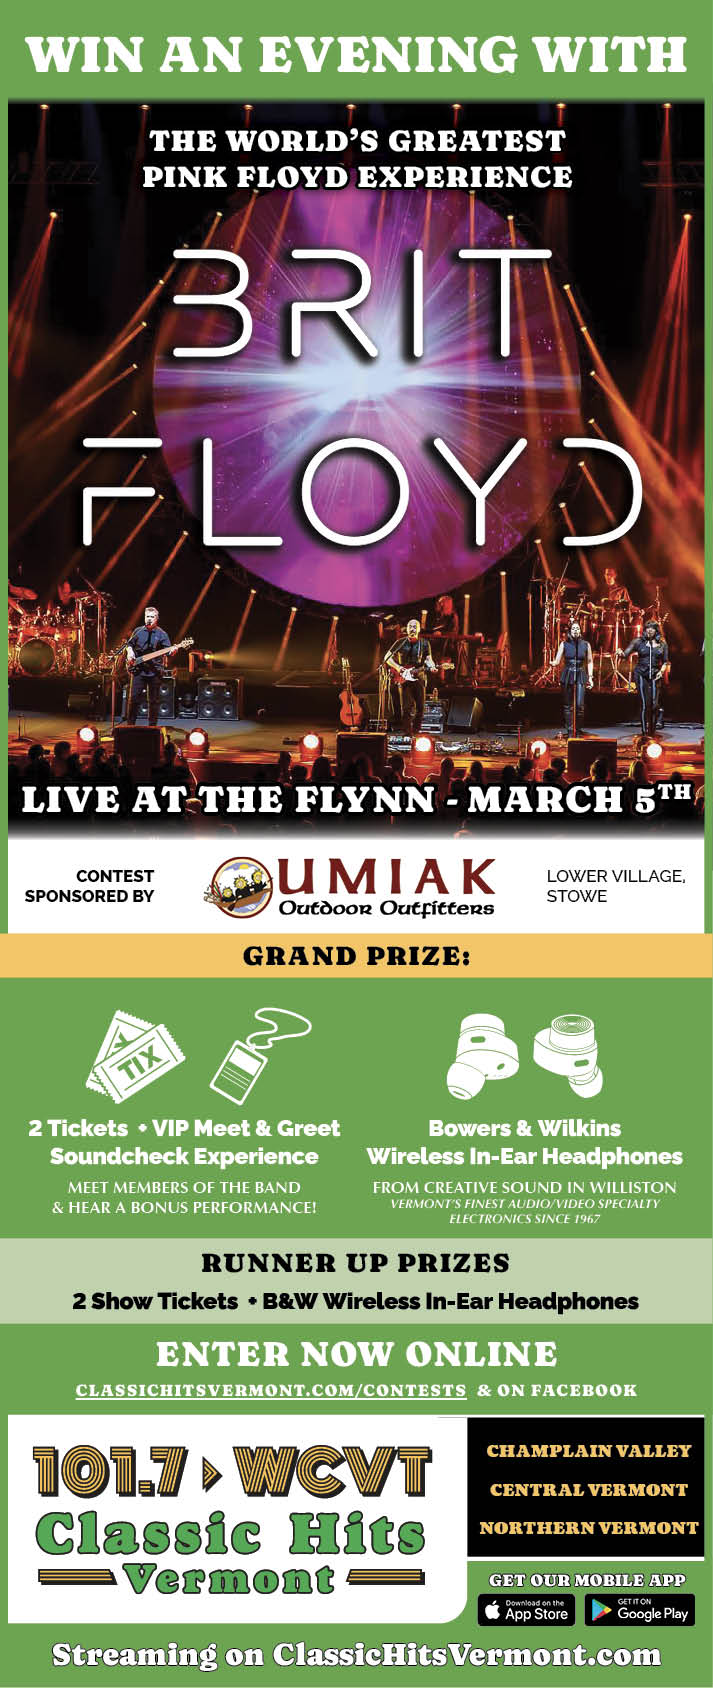 poster explaining to enter for a chance to win tickets to see Brit Floyd on March 5th at The Flynn Theater. The grand prize includes 2 tickets and a vip meet and greet soundcheck experience, as well as a Bowers & Wilkins Wireless in-ear headphones. The runner up will receive 2 show tickets and B&W Wireless in-ear headphones. You can enter here on our website, or on our facebook page